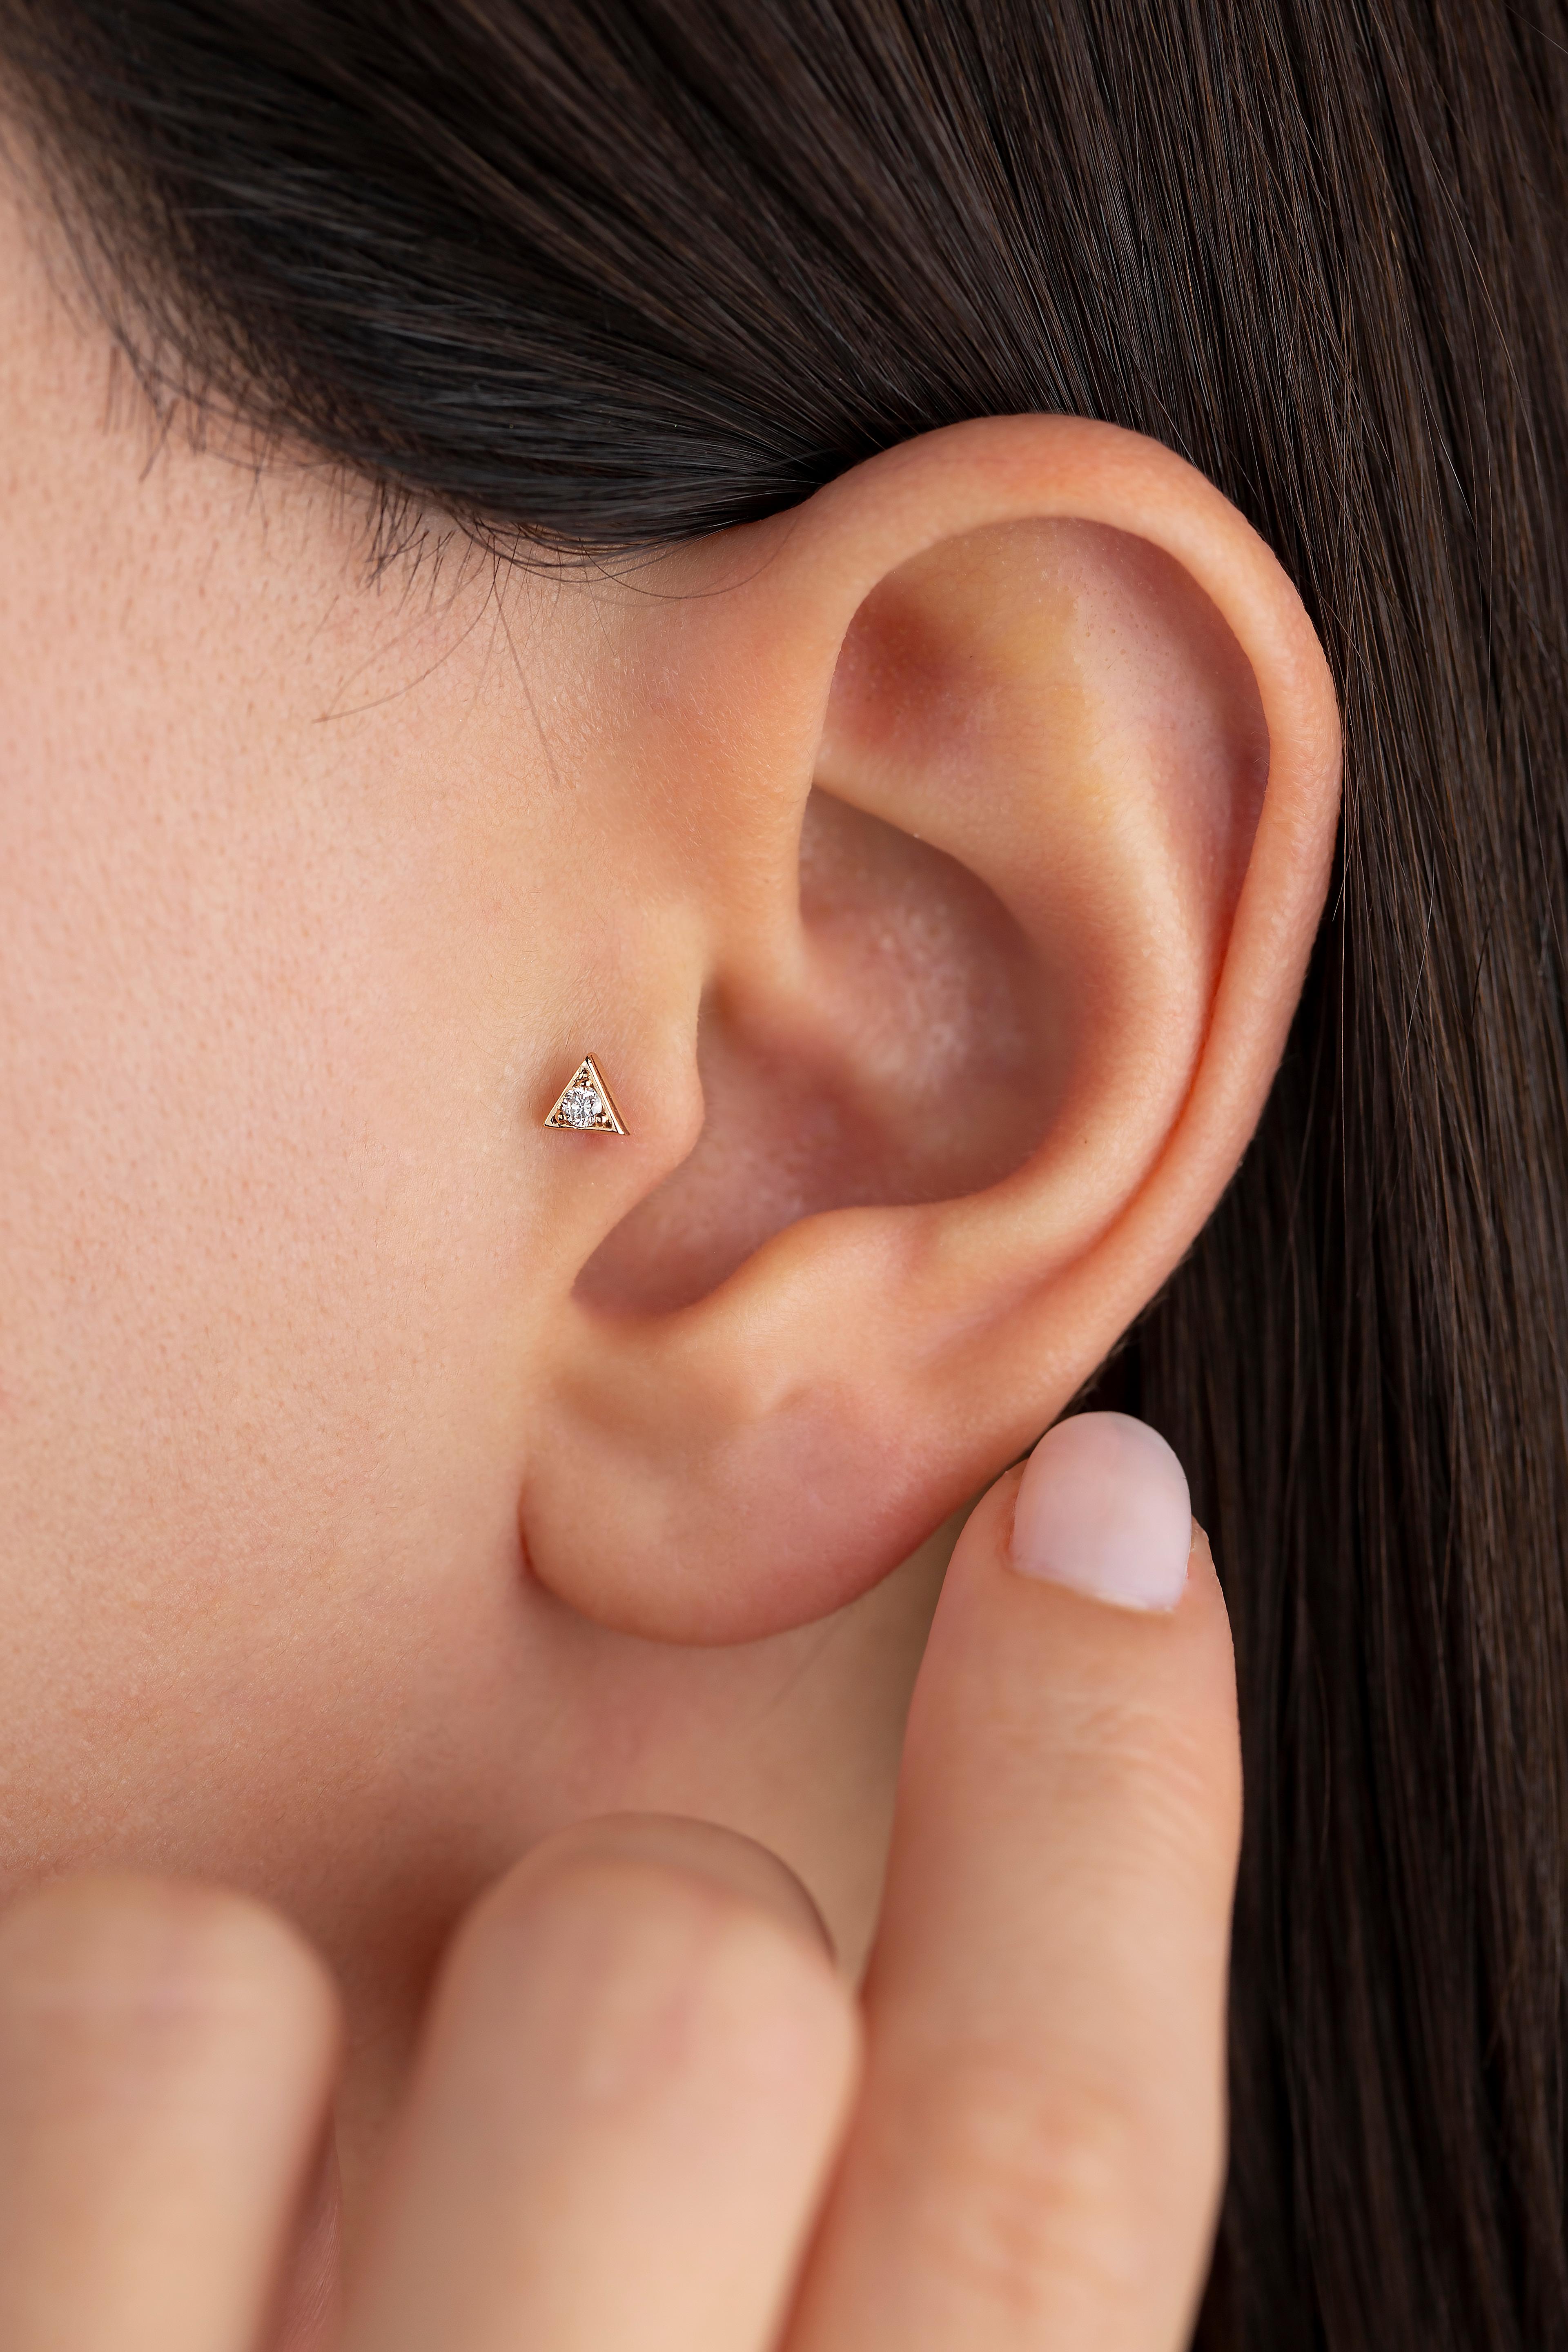 14K Gold 0.03 Ct Diamond Triangle Piercing Gold, 0.03 ct Diamond Trigon Earring

You can use the piercing as an earring too! Also this piercing is suitable for tragus, nose, helix, lobe, flat, medusa, monreo, labret and stud.

This piercing was made